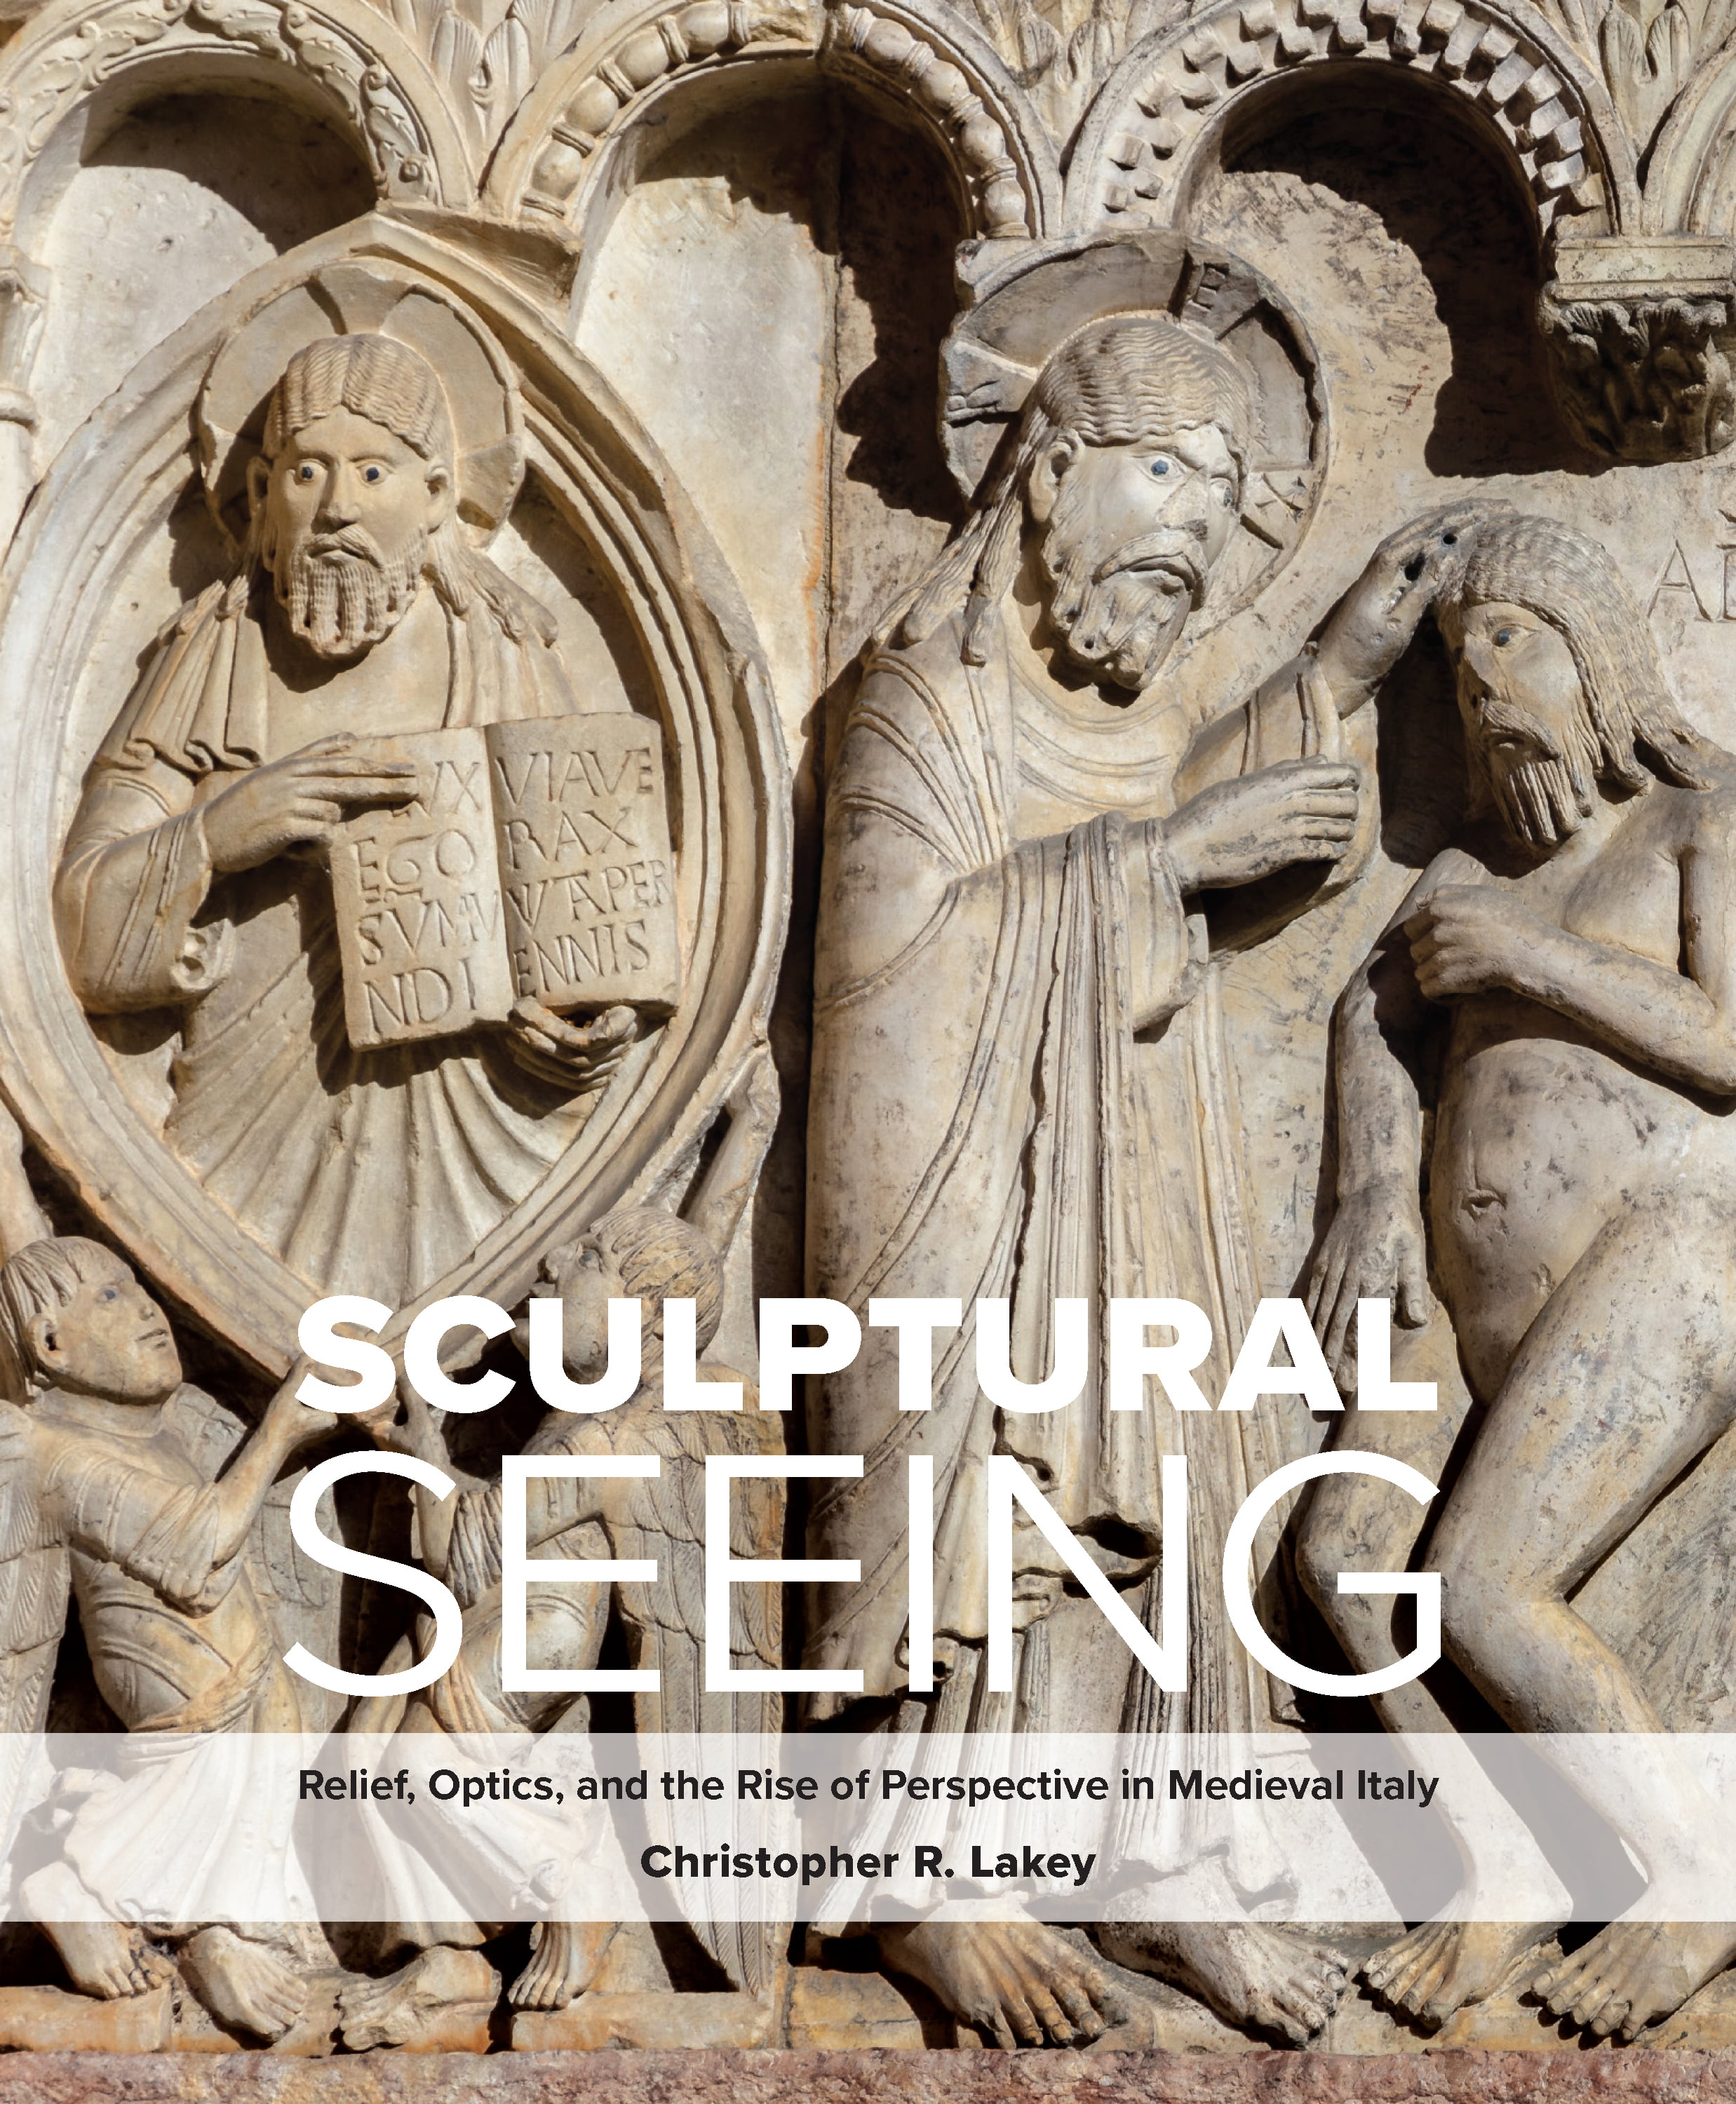 Sculptural-Seeing-Relief-Optics-and-the-Rise-of-Perspective-in-Medieval-Italy